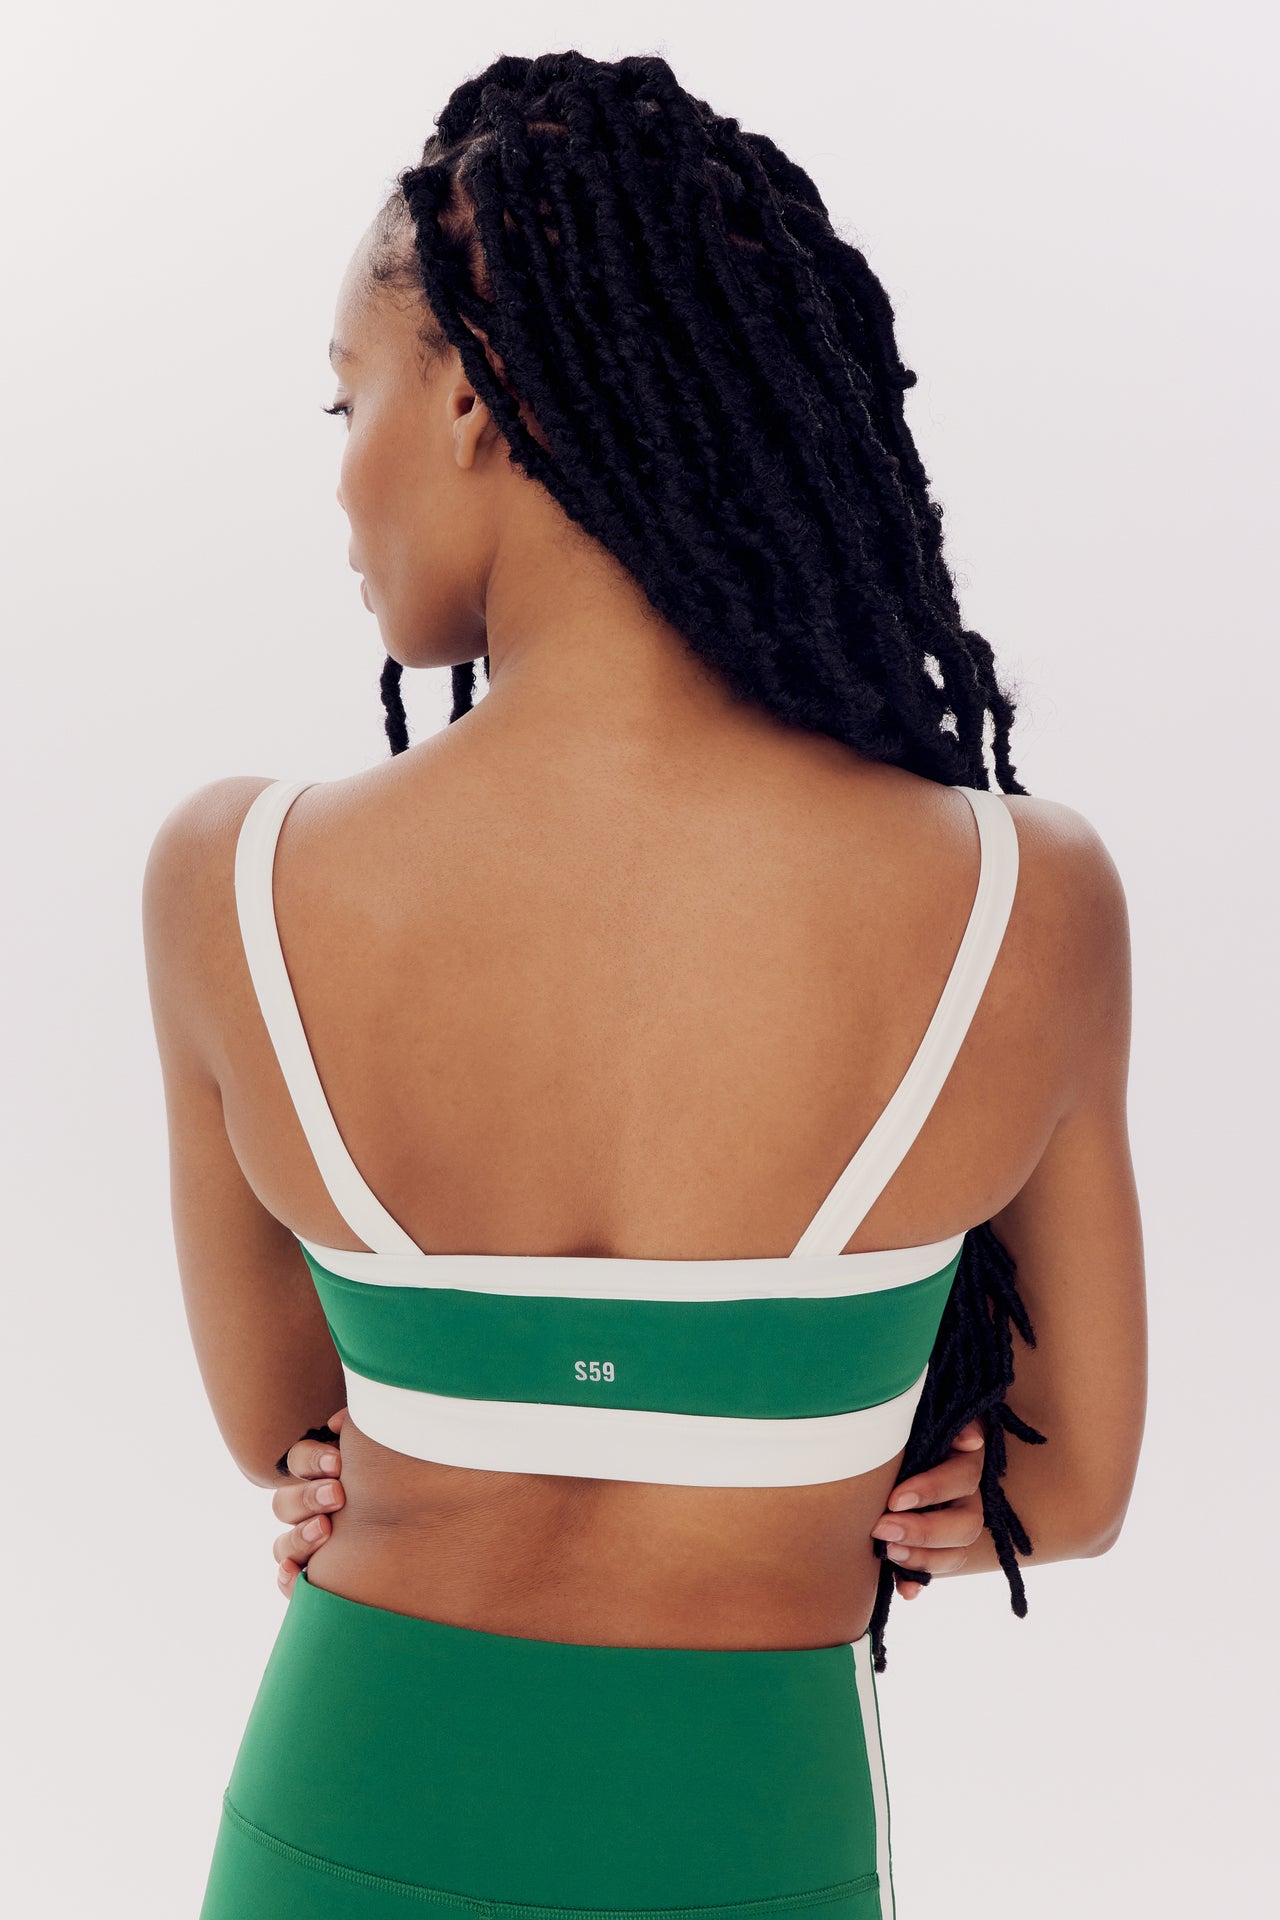 Rear view of a woman with braided hair wearing a white and green SPLITS59 Monah Rigor Bra in Arugula/White, standing against a white background.